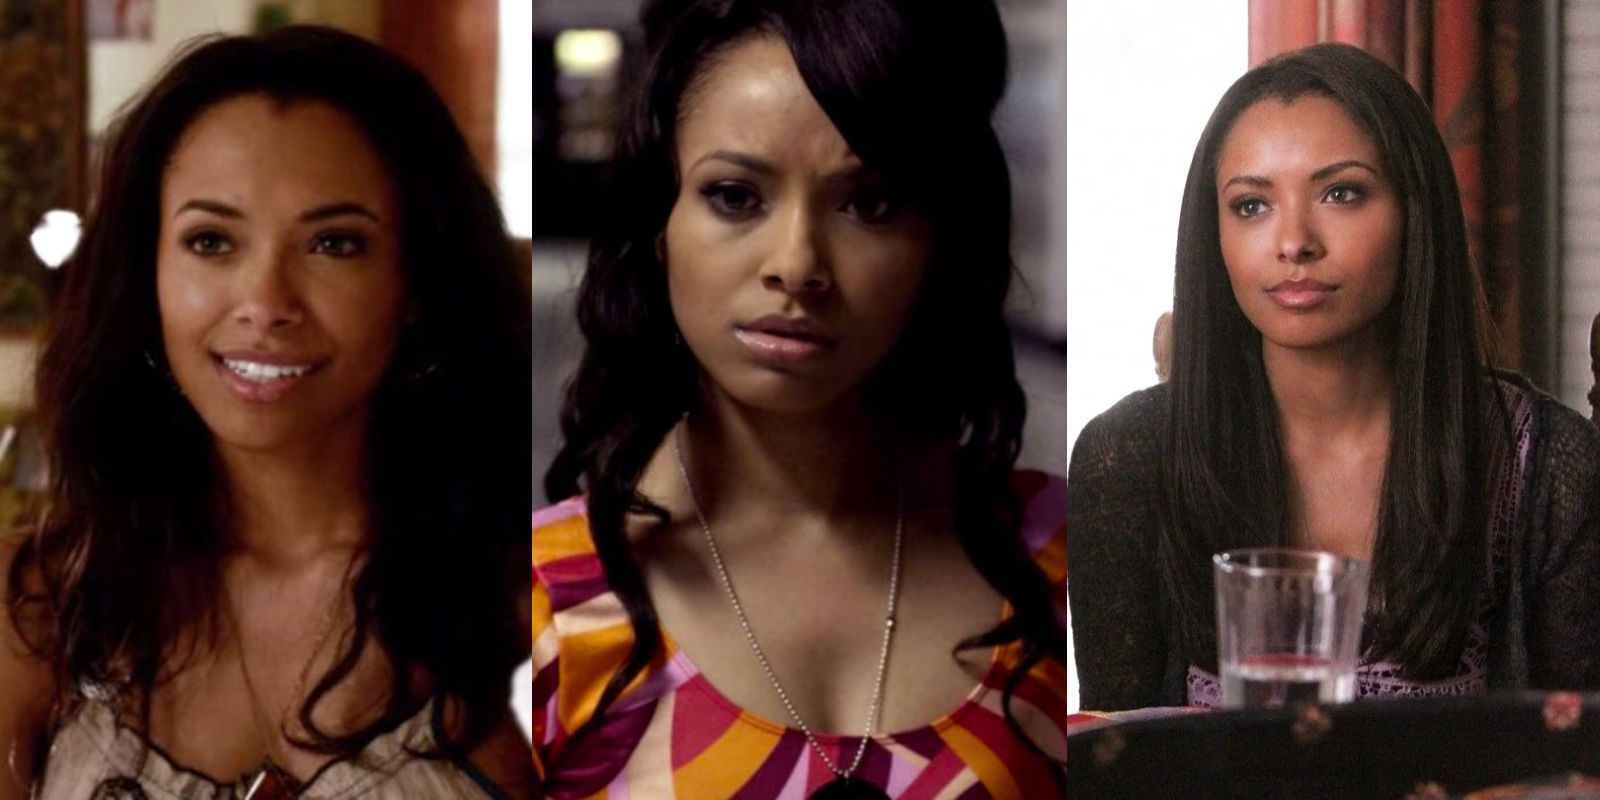 Split image of Bonnie doing a spell, in the school hallway, and sitting at the table in The Vampire Diaries.